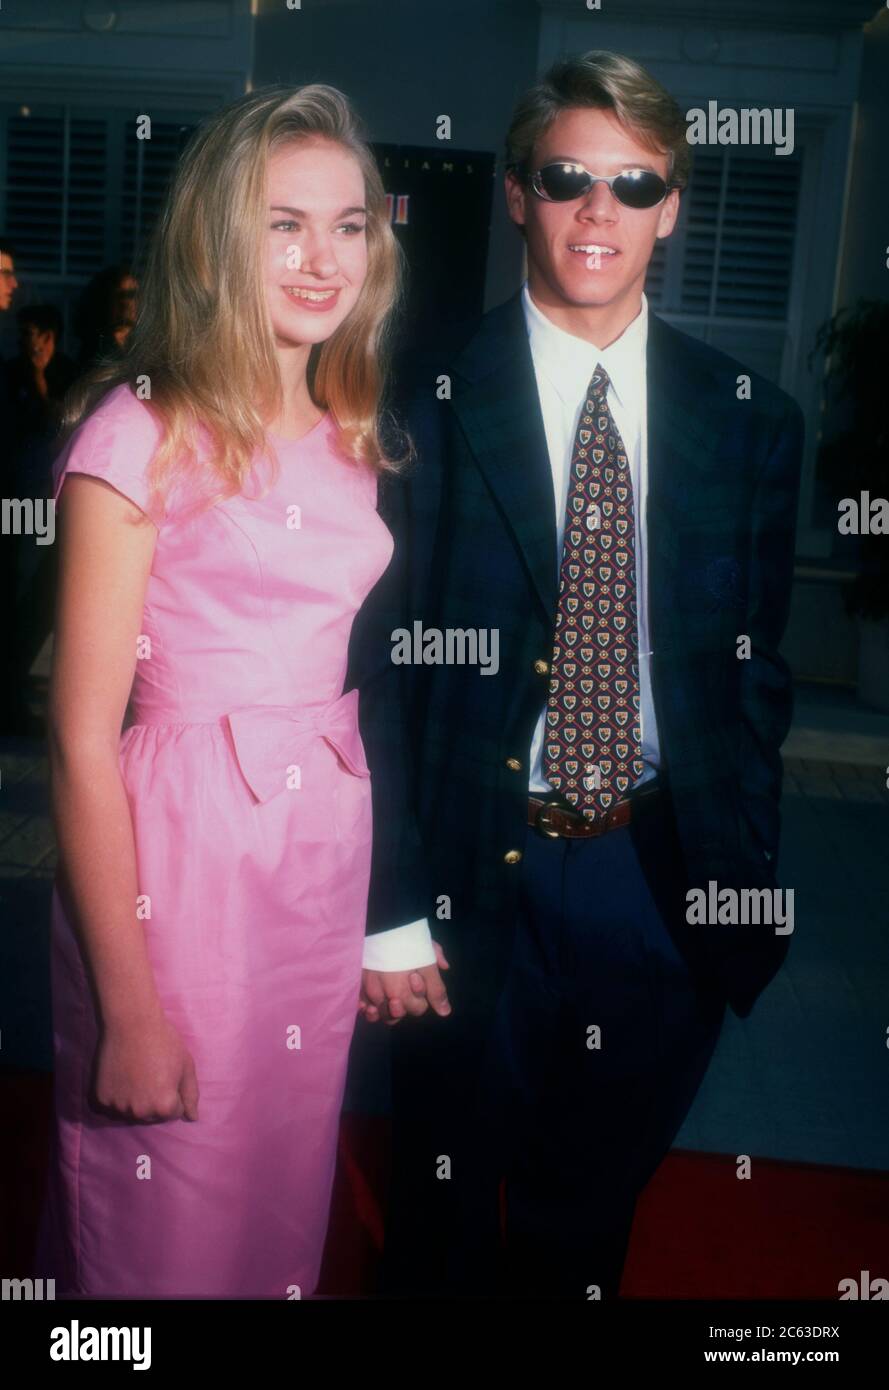 Culver City, California, USA 10th December 1995 Actress Laura Bell Bundy  and actor Hunter Garner attend Sony Pictures' 'Jumanji' Premiere on  December 10, 1995 at Sony Pictures Studios in Culver City, California,